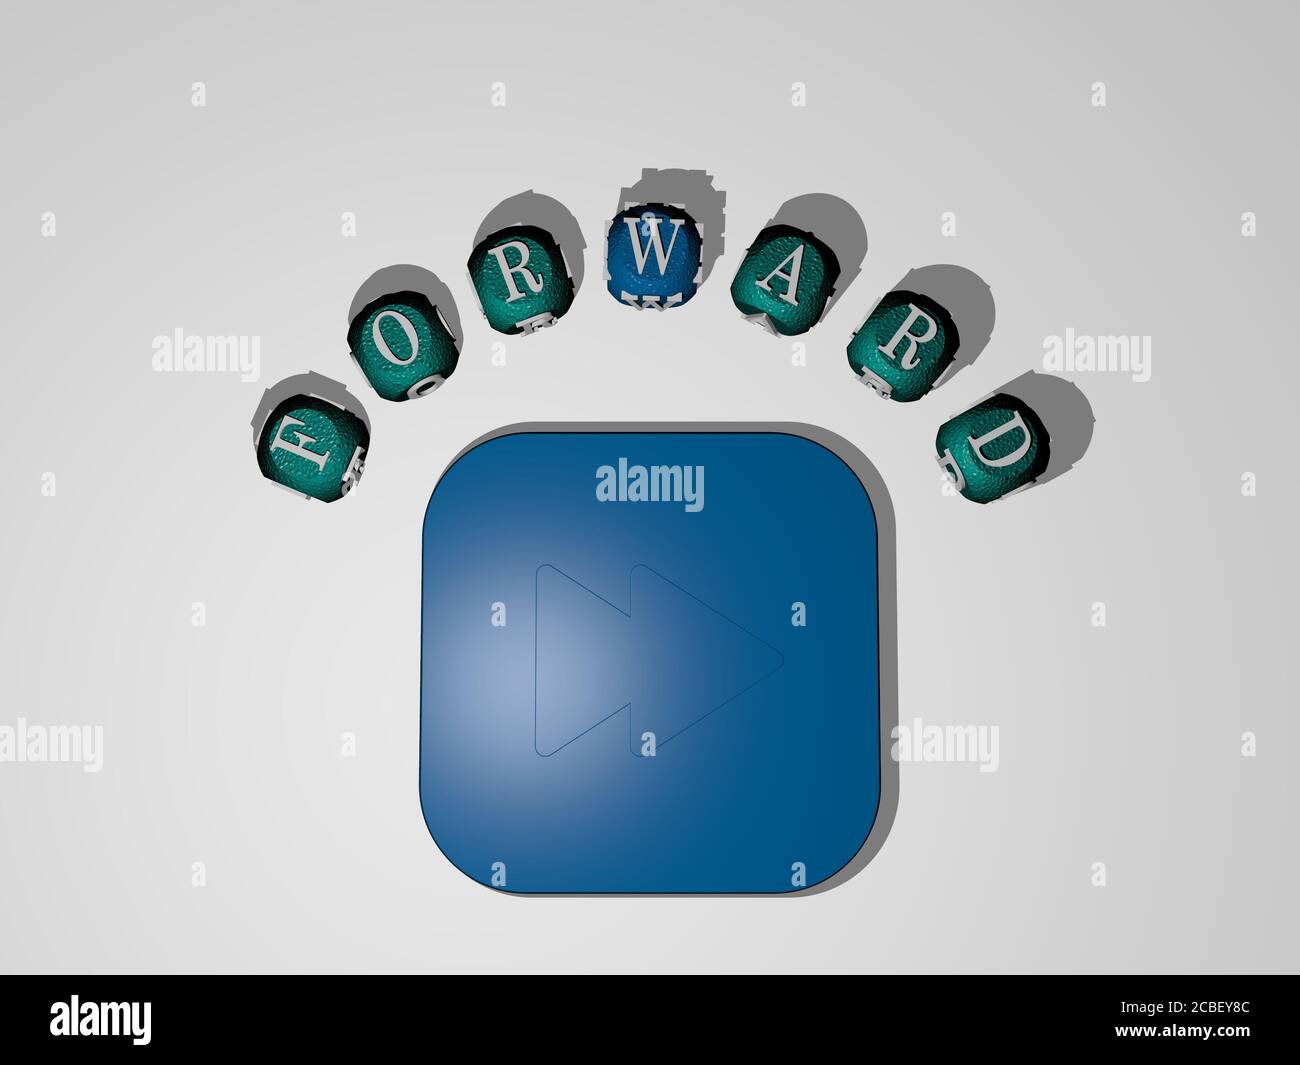 forward icon surrounded by the text of individual letters - 3D illustration for background and concept Stock Photo